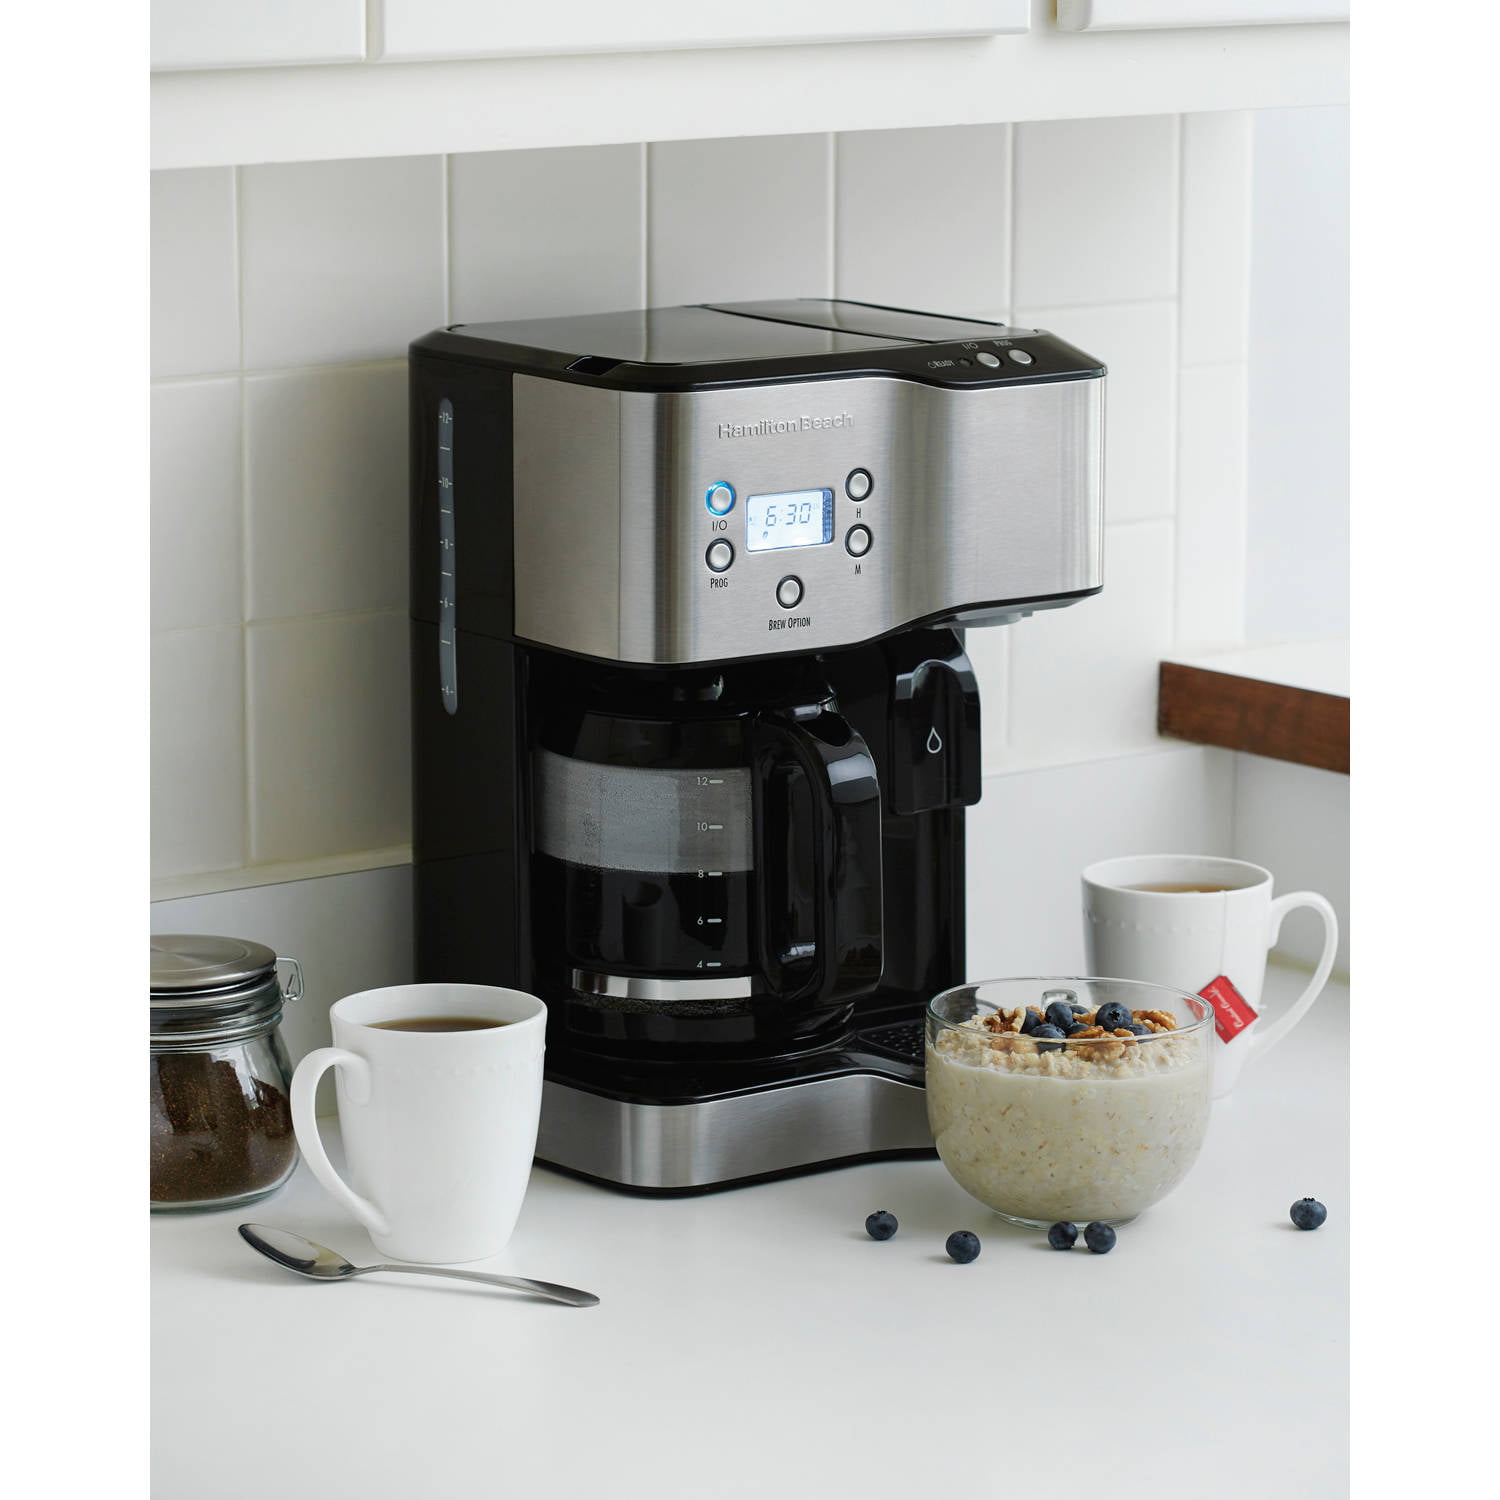 Hamilton Beach Coffeemaker & Hot Water Dispenser Review, Price and